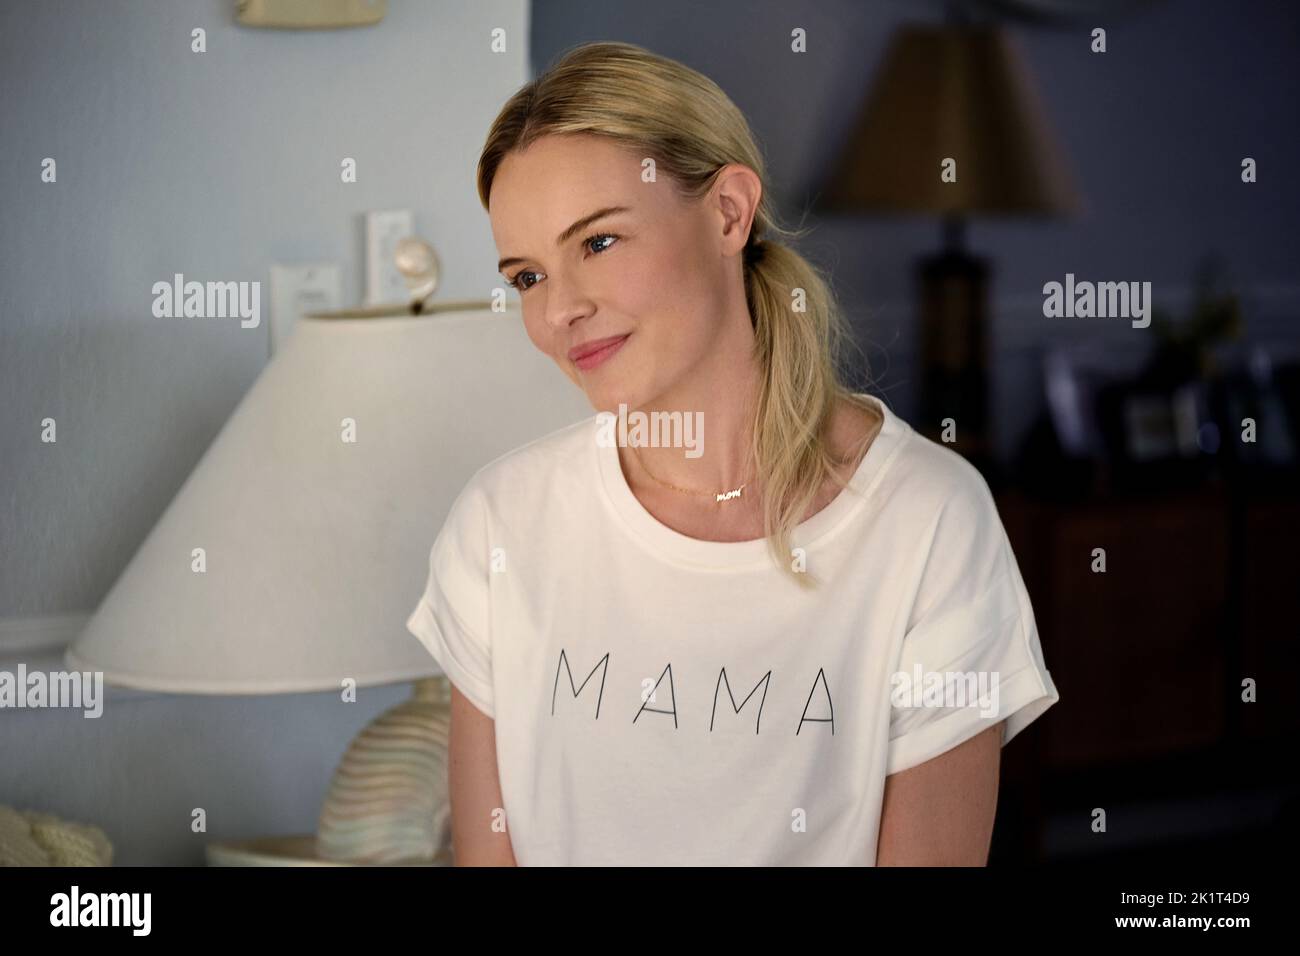 KATE BOSWORTH in ALONG FOR THE RIDE (2022), directed by SOFIA ALVAREZ. Credit: Screen Arcade / Album Stock Photo